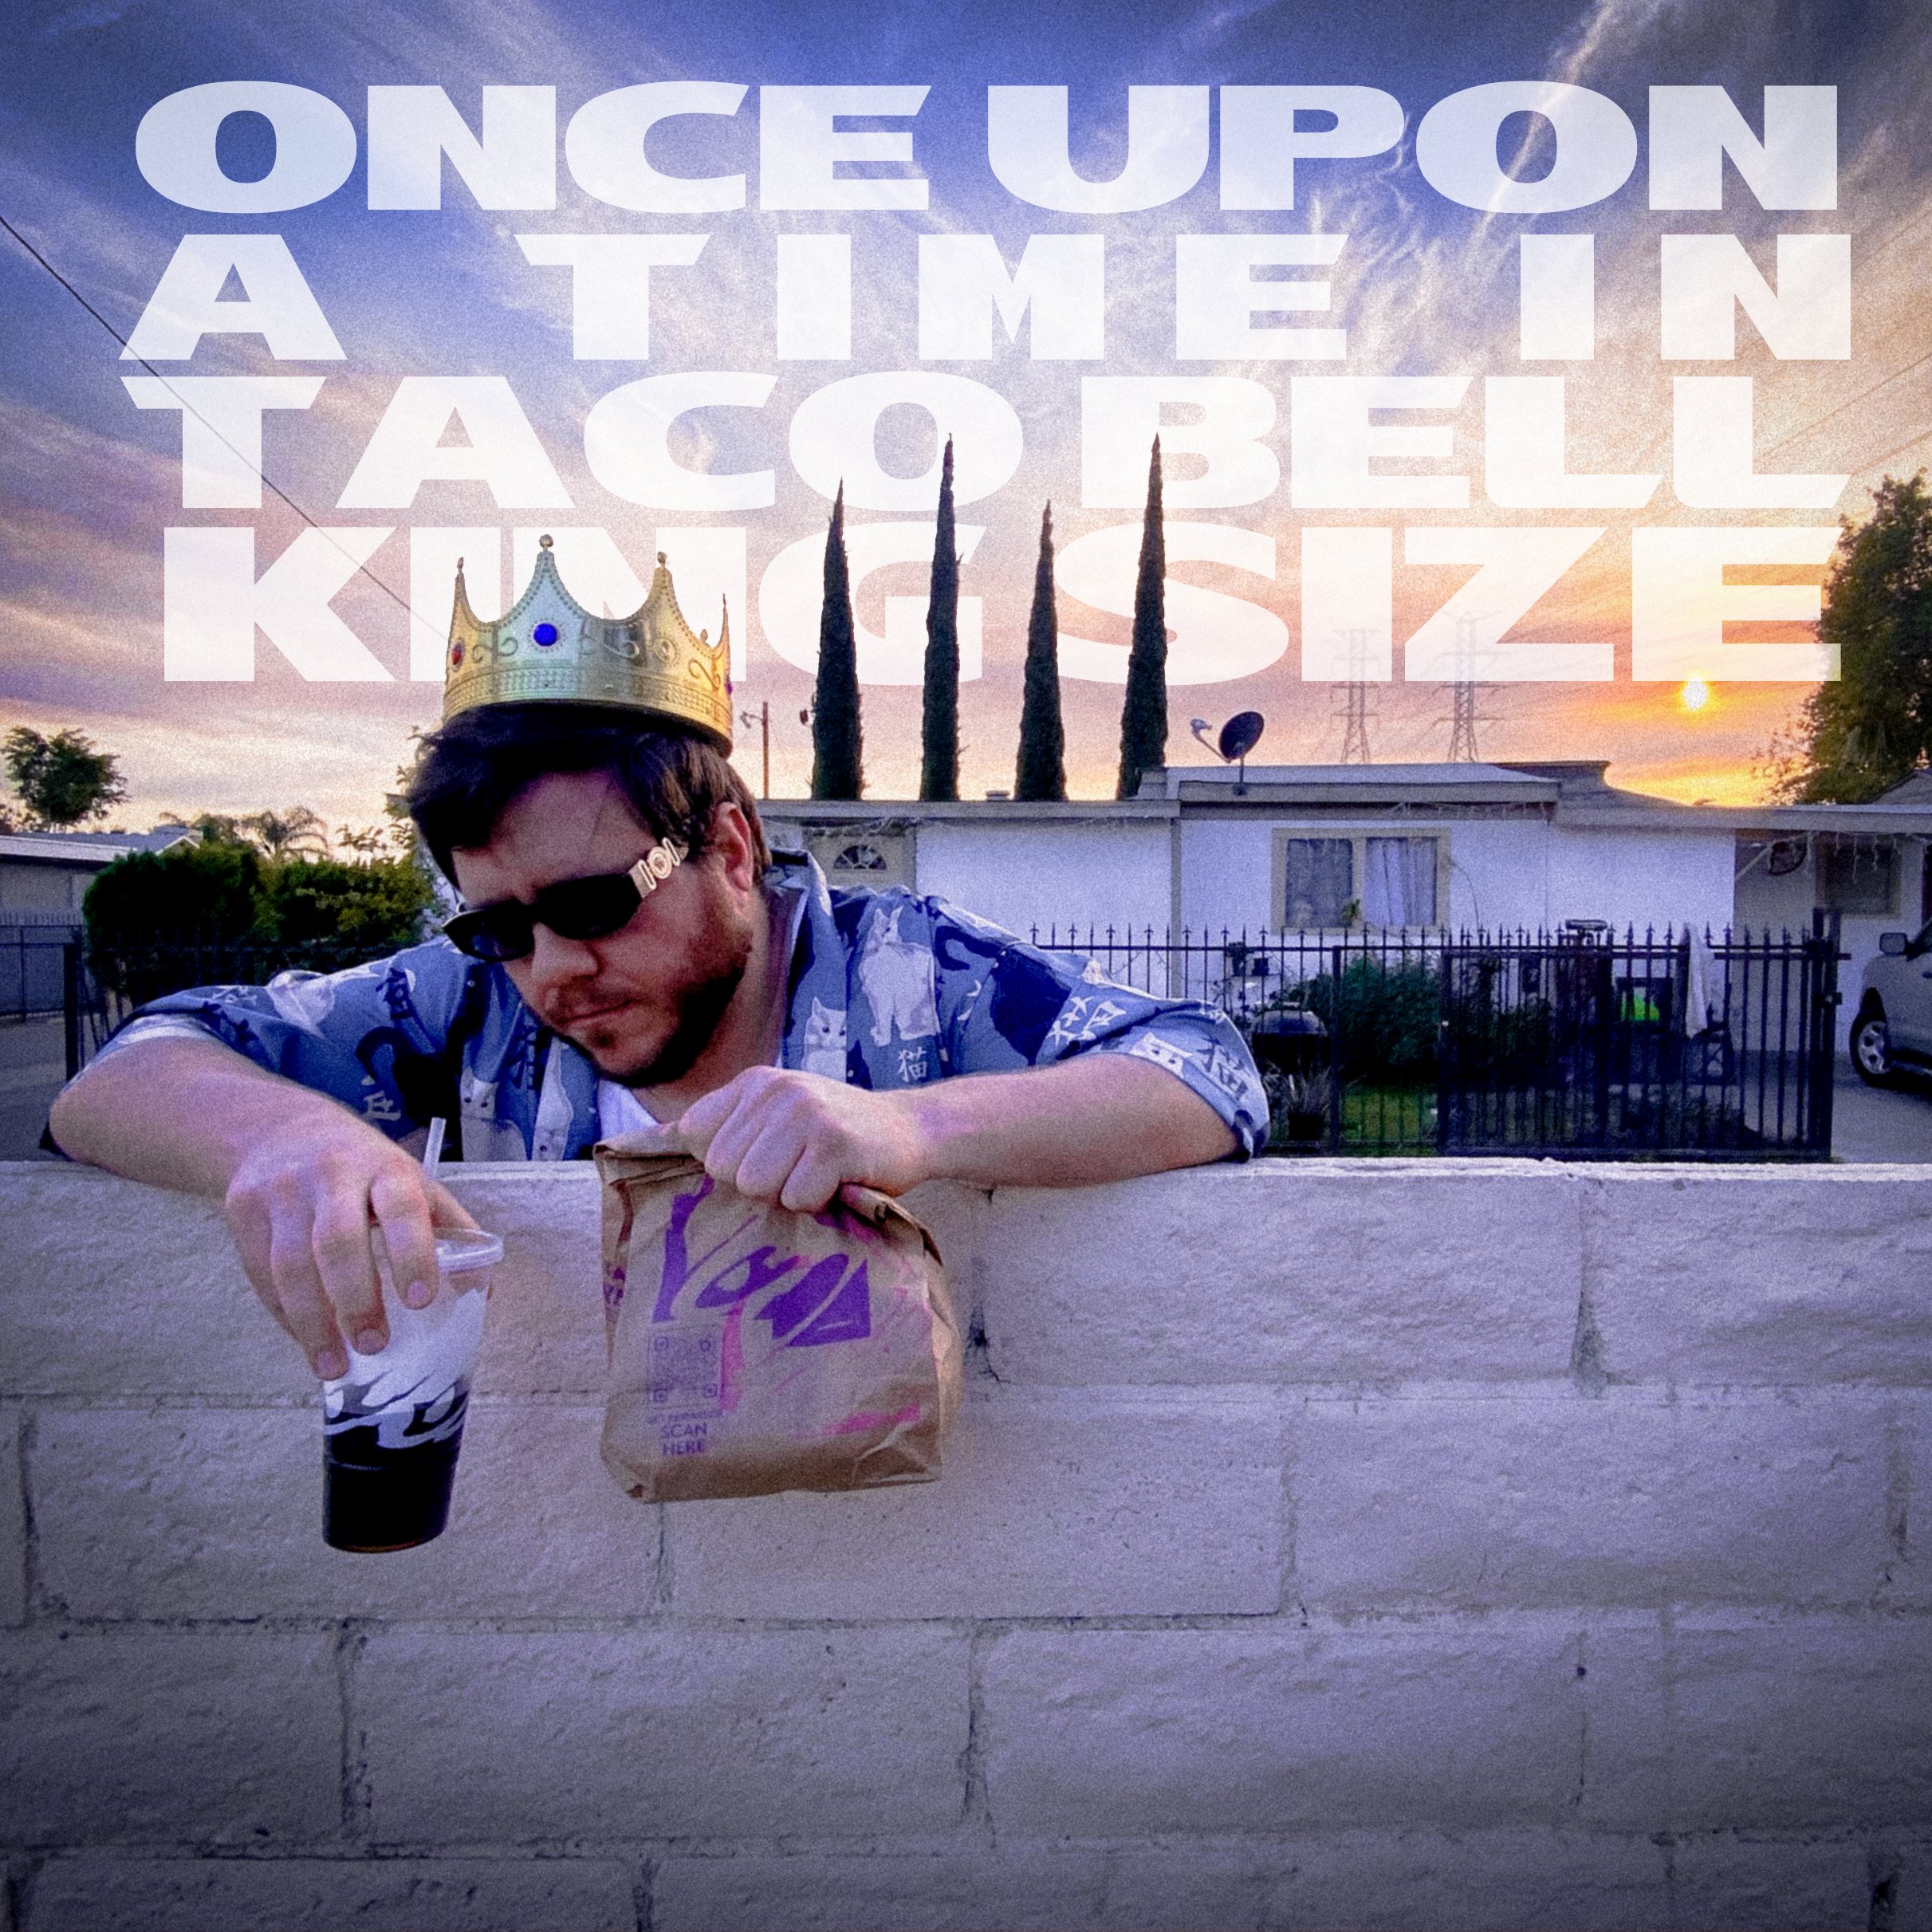 King Size – “Once Upon a Time in Taco Bell”